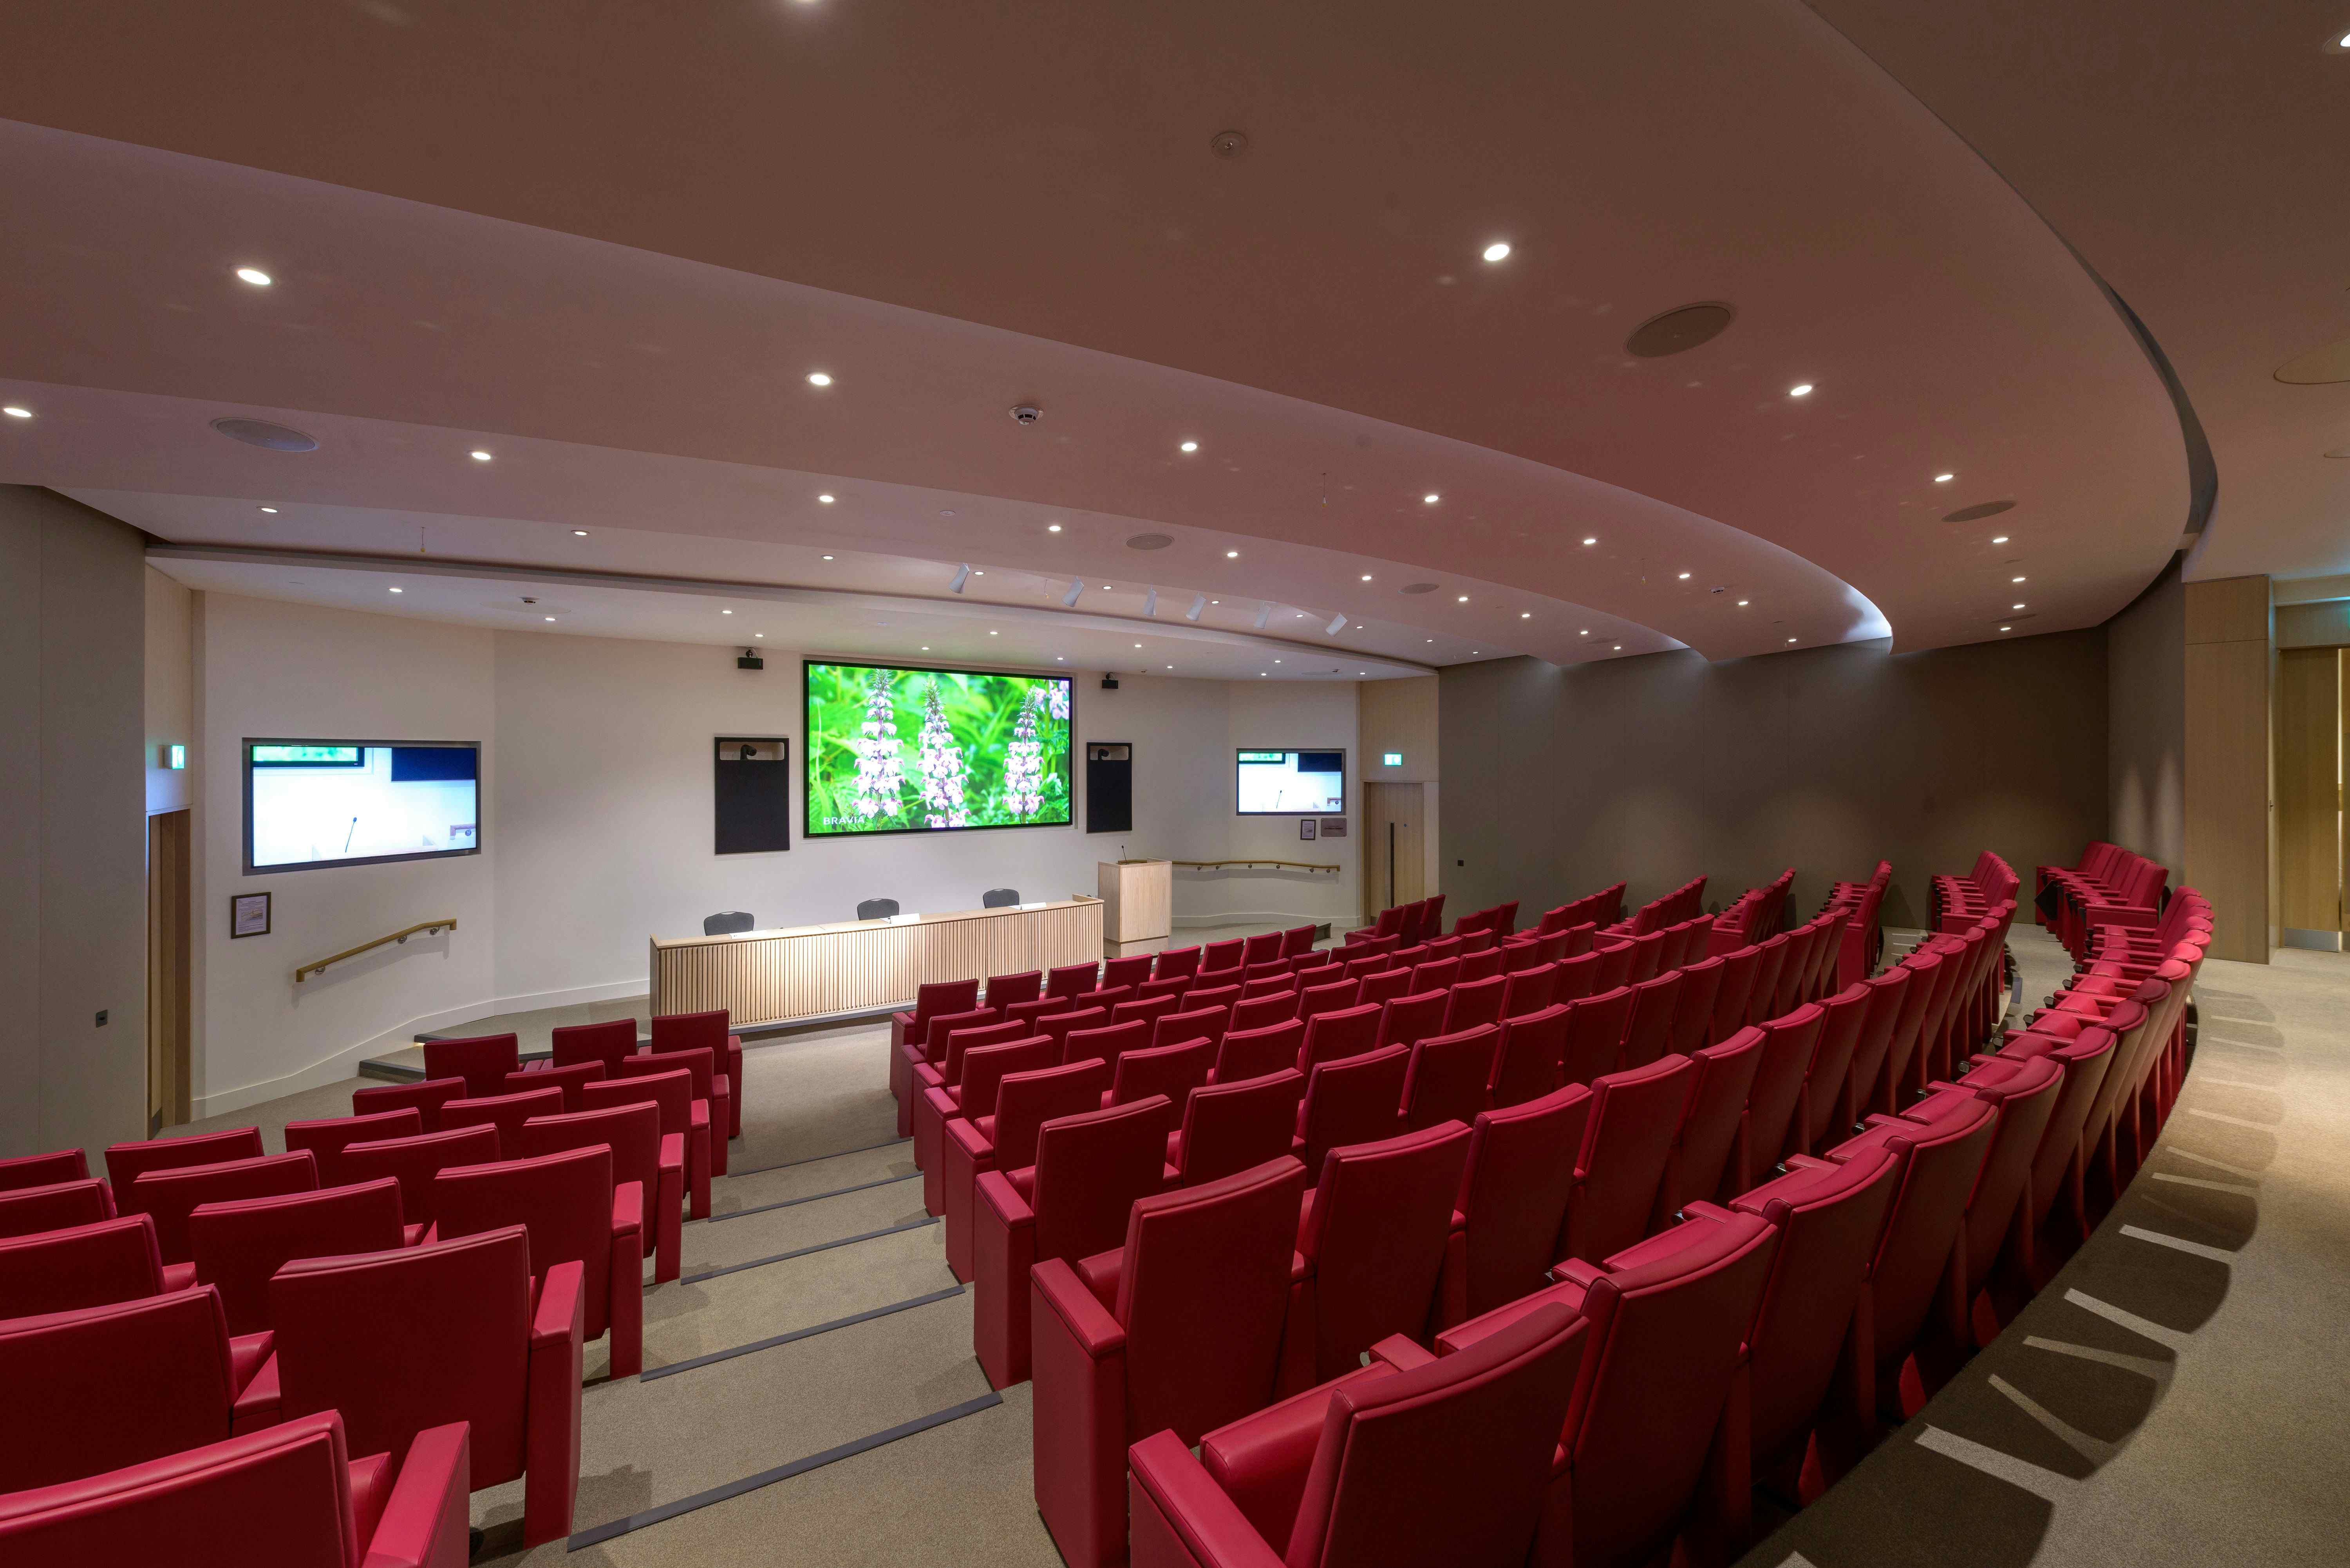 Turing Lecture Theatre, IET London: Savoy Place